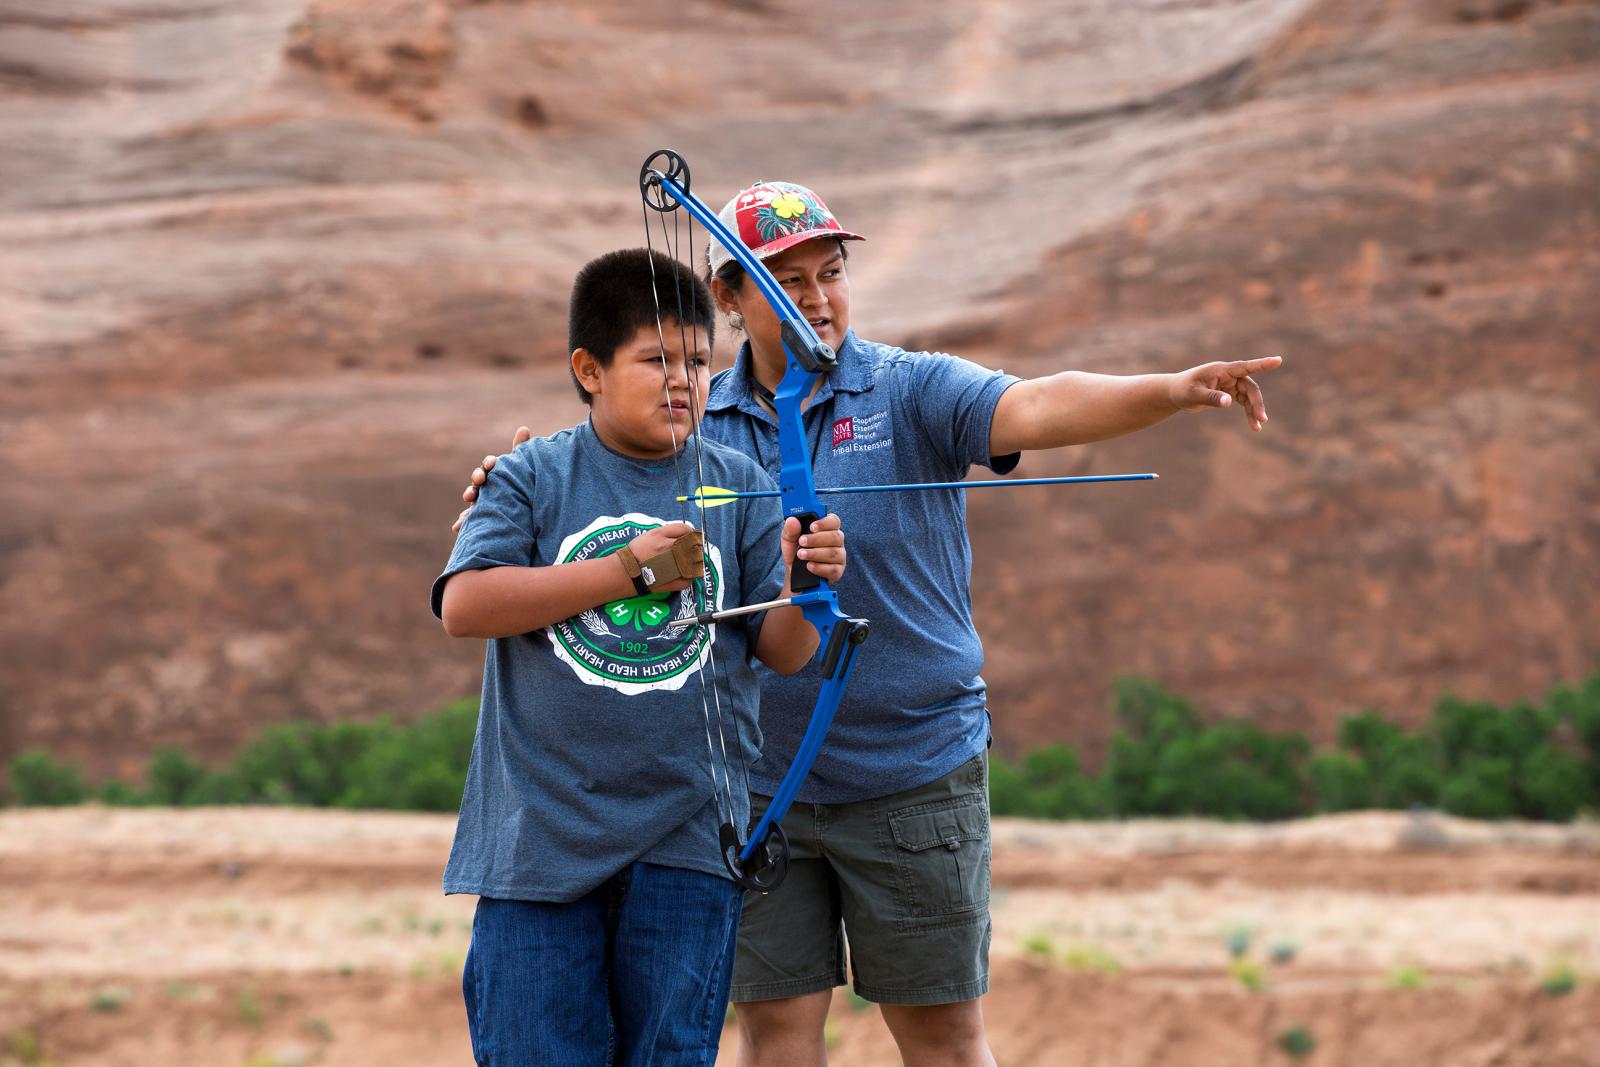 4-H volunteer helping youth with archery